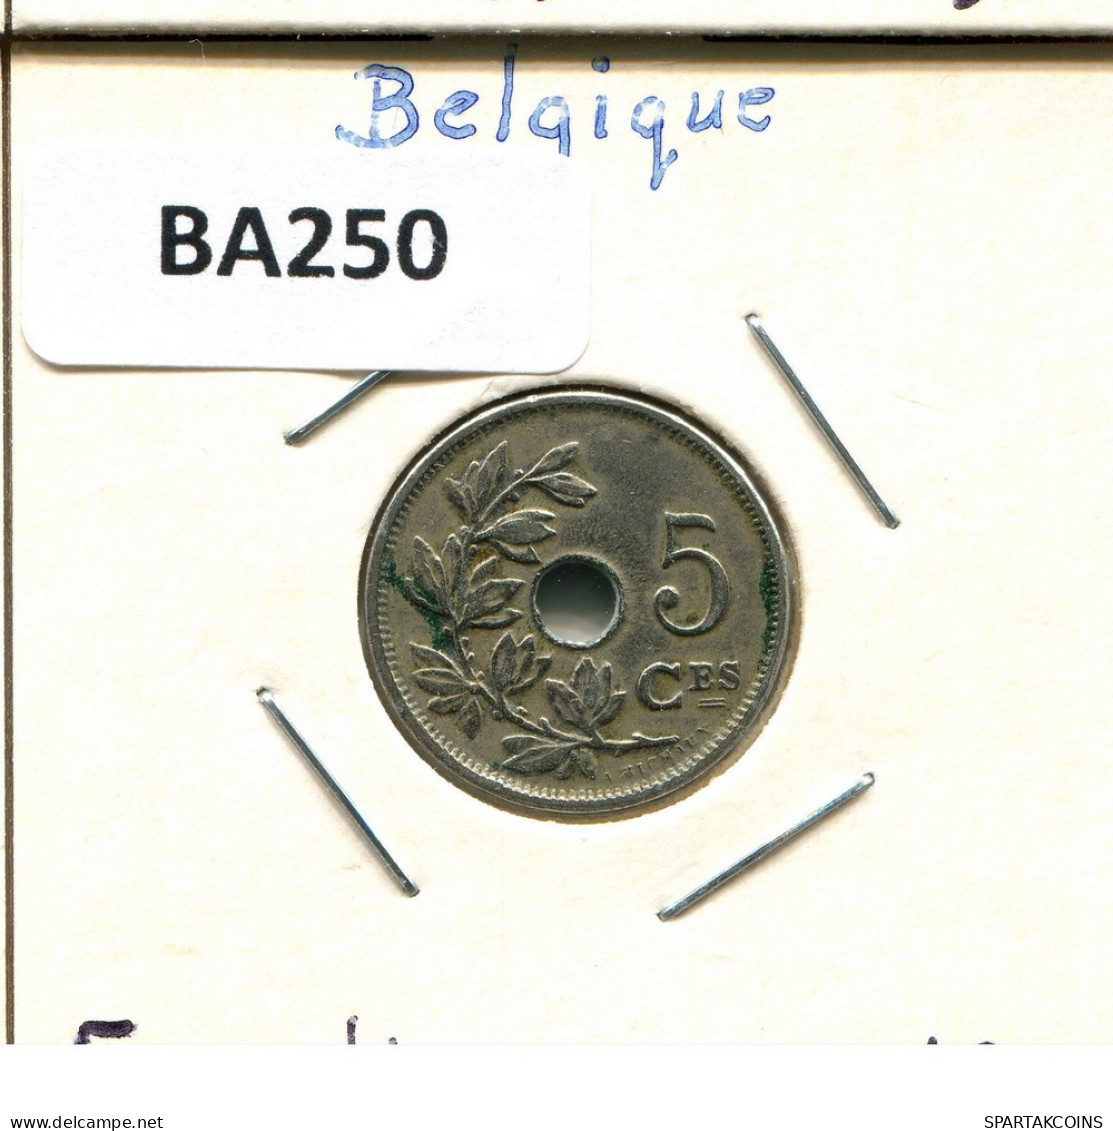 5 CENTIMES 1920 FRENCH Text BELGIUM Coin #BA250.U - 5 Cents